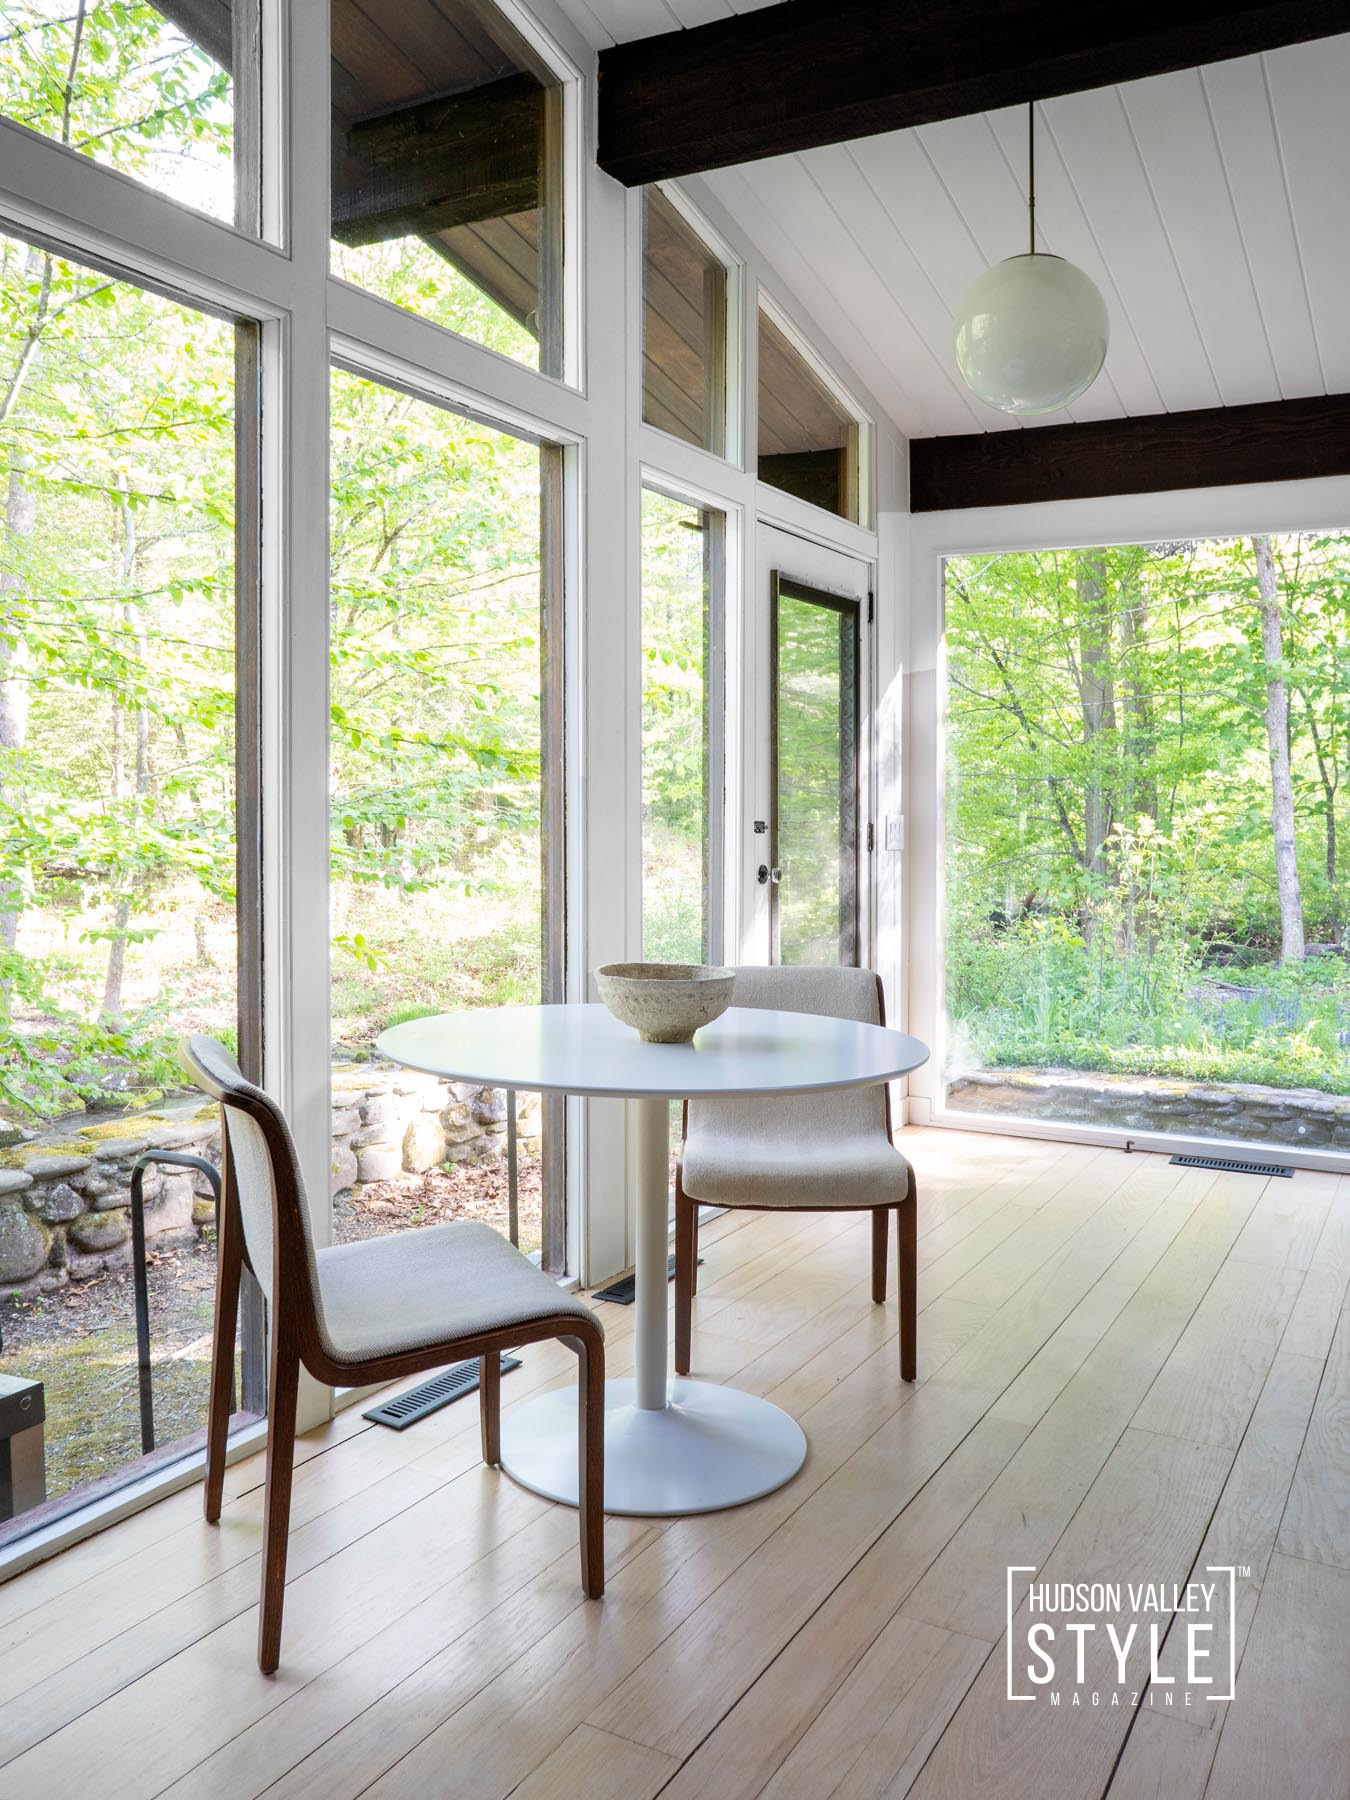 Stay in the Modern Airbnb Cabin by a Creek in Catskills – Airbnb Photography by ALLUVION MEDIA – Presented by ALLUVION VACATIONS – The Best Vacation Rental Management in Hudson Valley